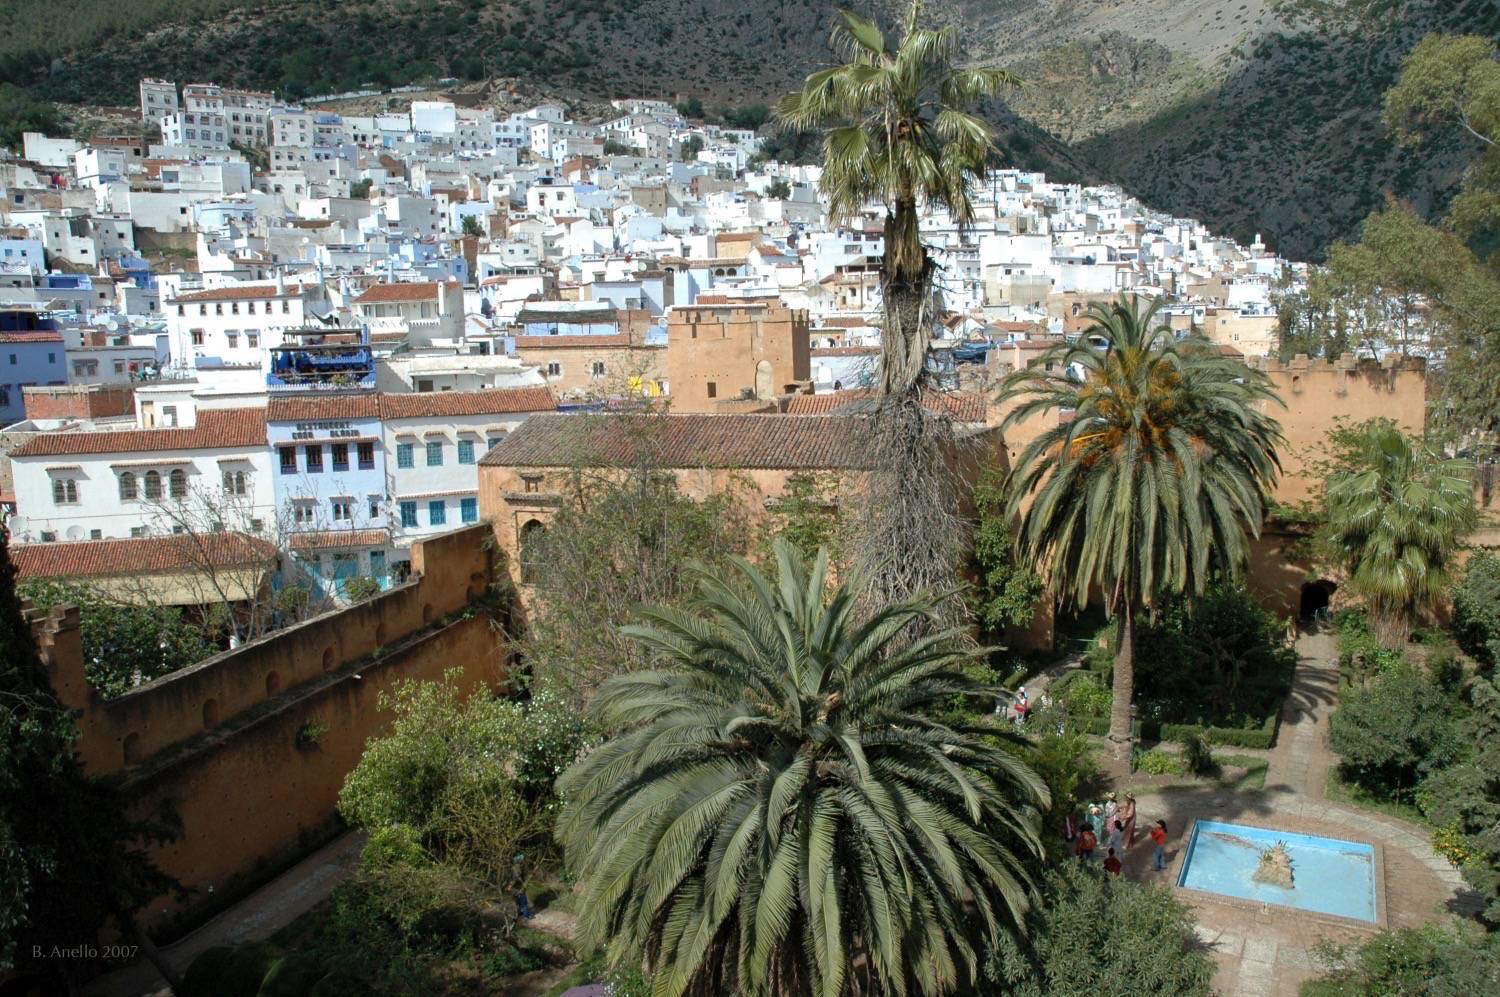 Bird's-eye view into the courtyard of the kasbah, with the city beyond